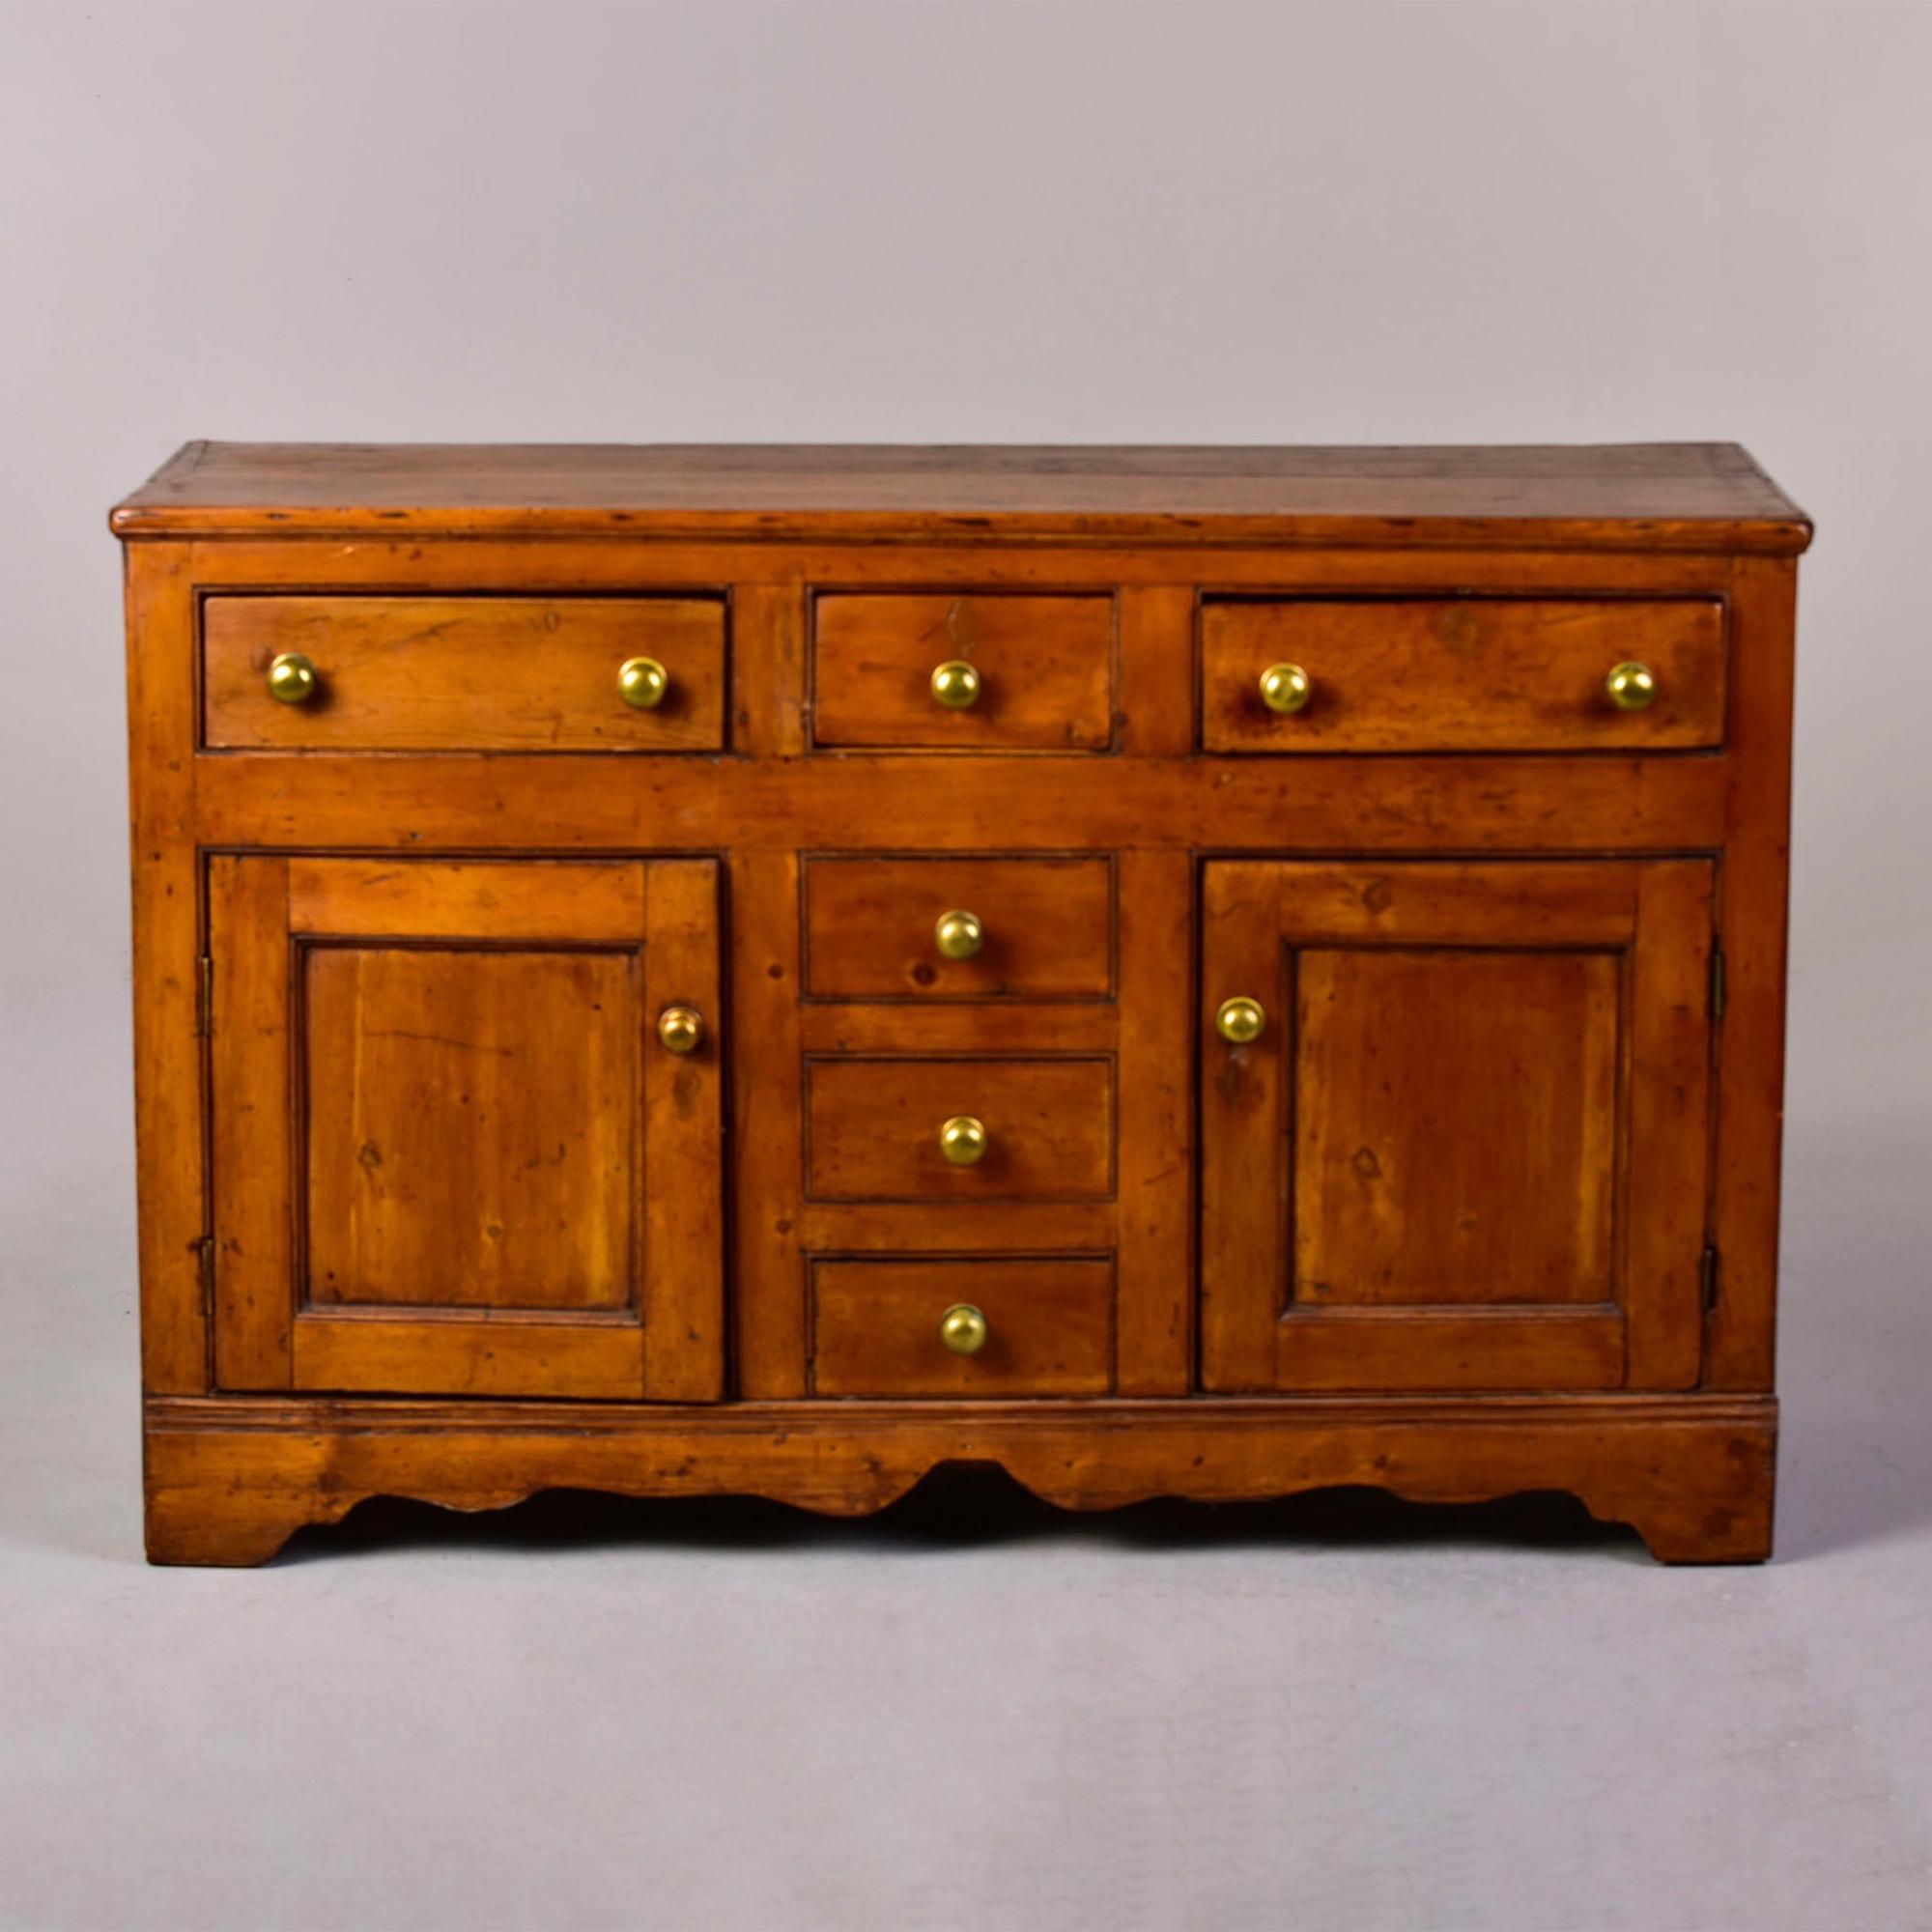 Circa 1880s English country buffet in pine with original brass hardware. Apron at bottom of base has subtle curves. Two lower level hinged door storage compartments with three small drawers between them and the top level has another three drawers.